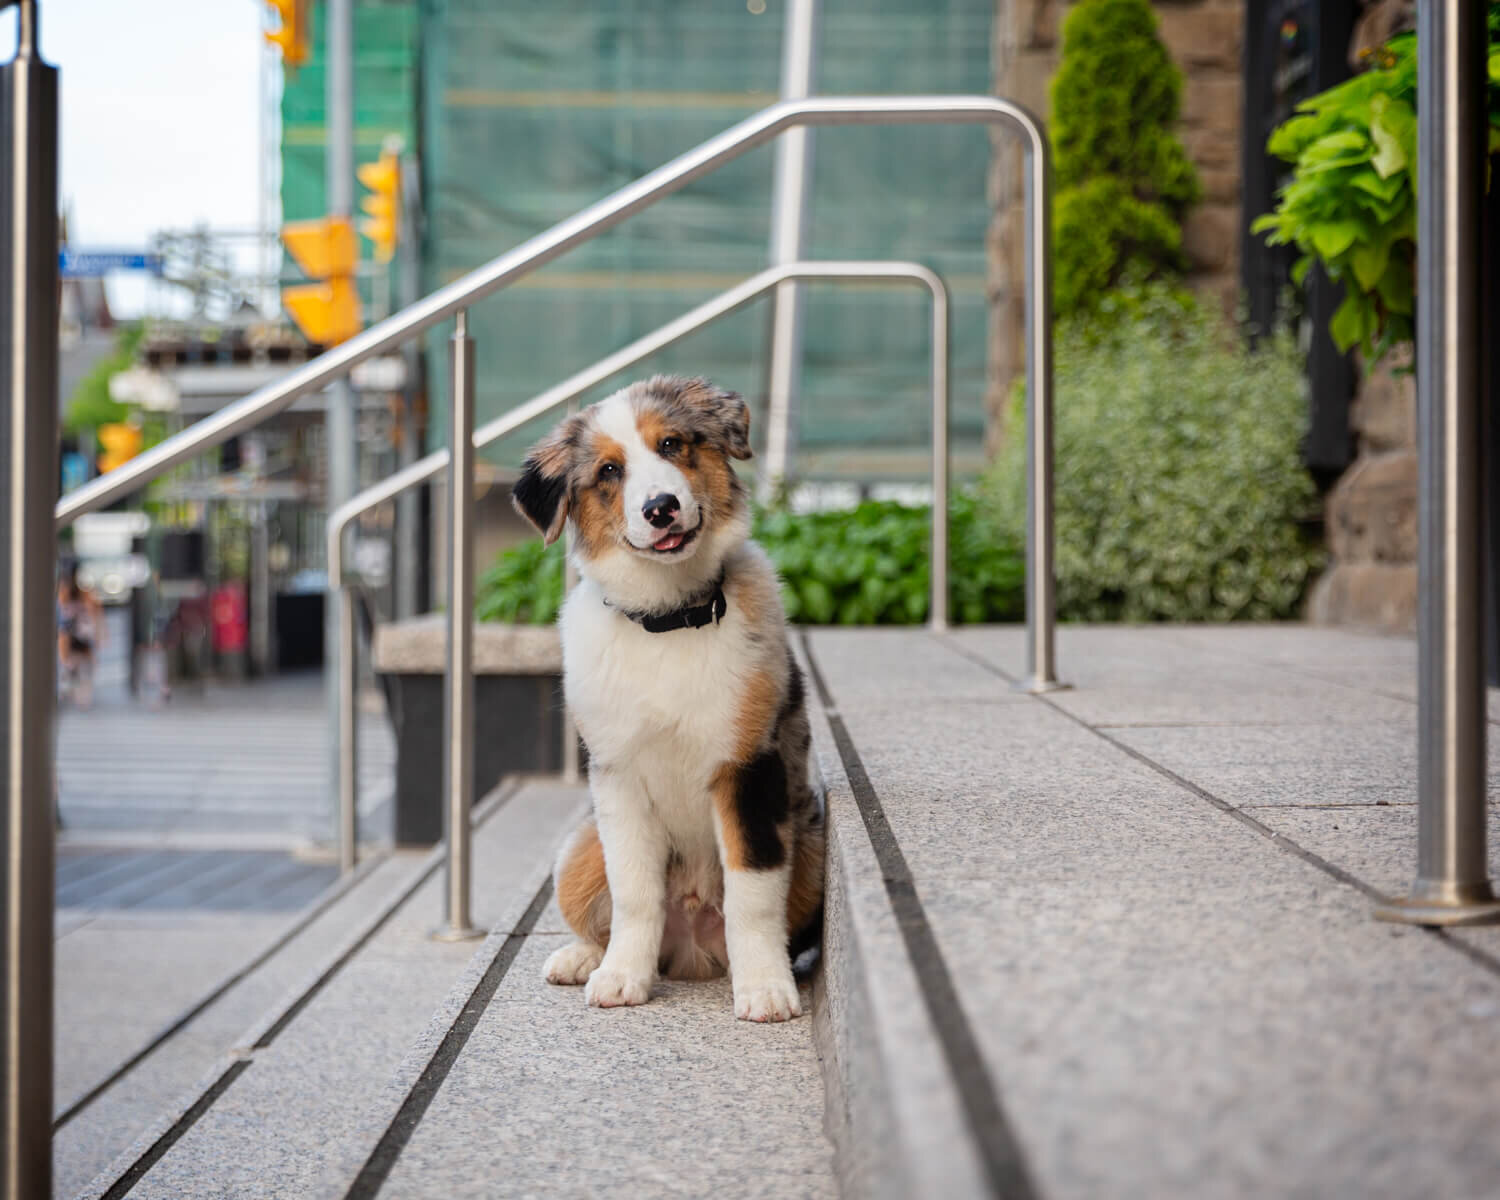 PUPPY FRAMED BY STAIR RAILINGS IN A TORONTO CITY PHOTO SESSION